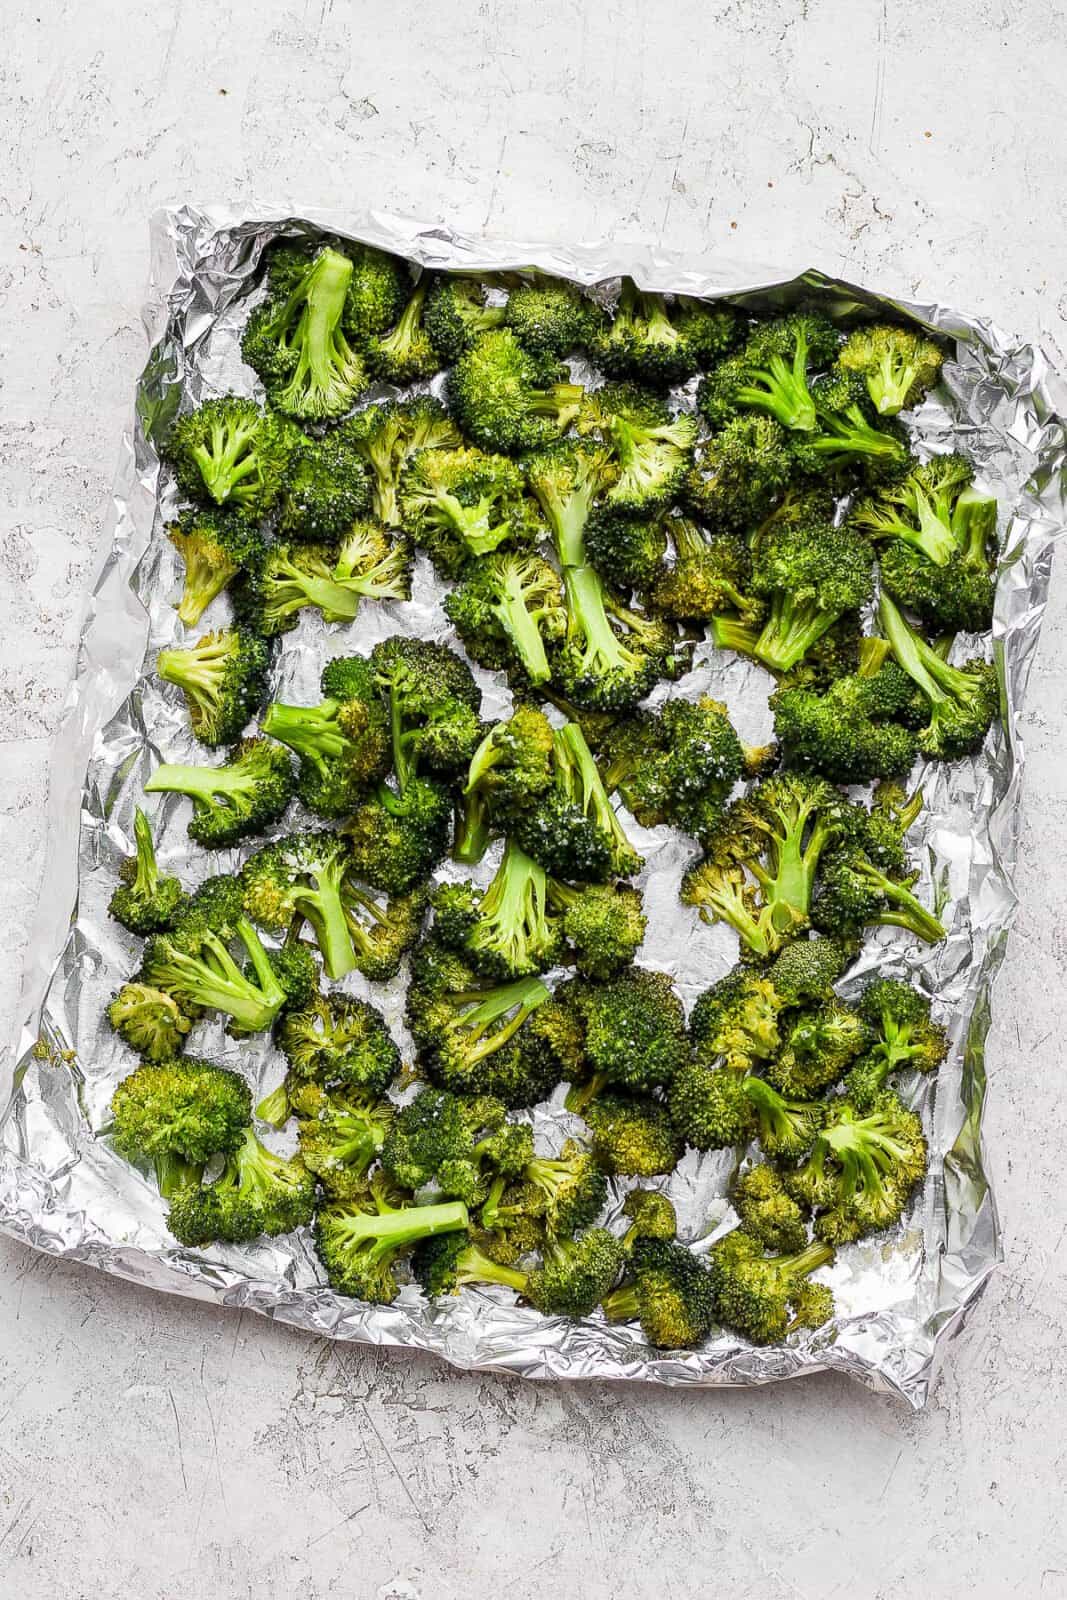 Smoked broccoli in an aluminum foil boat.